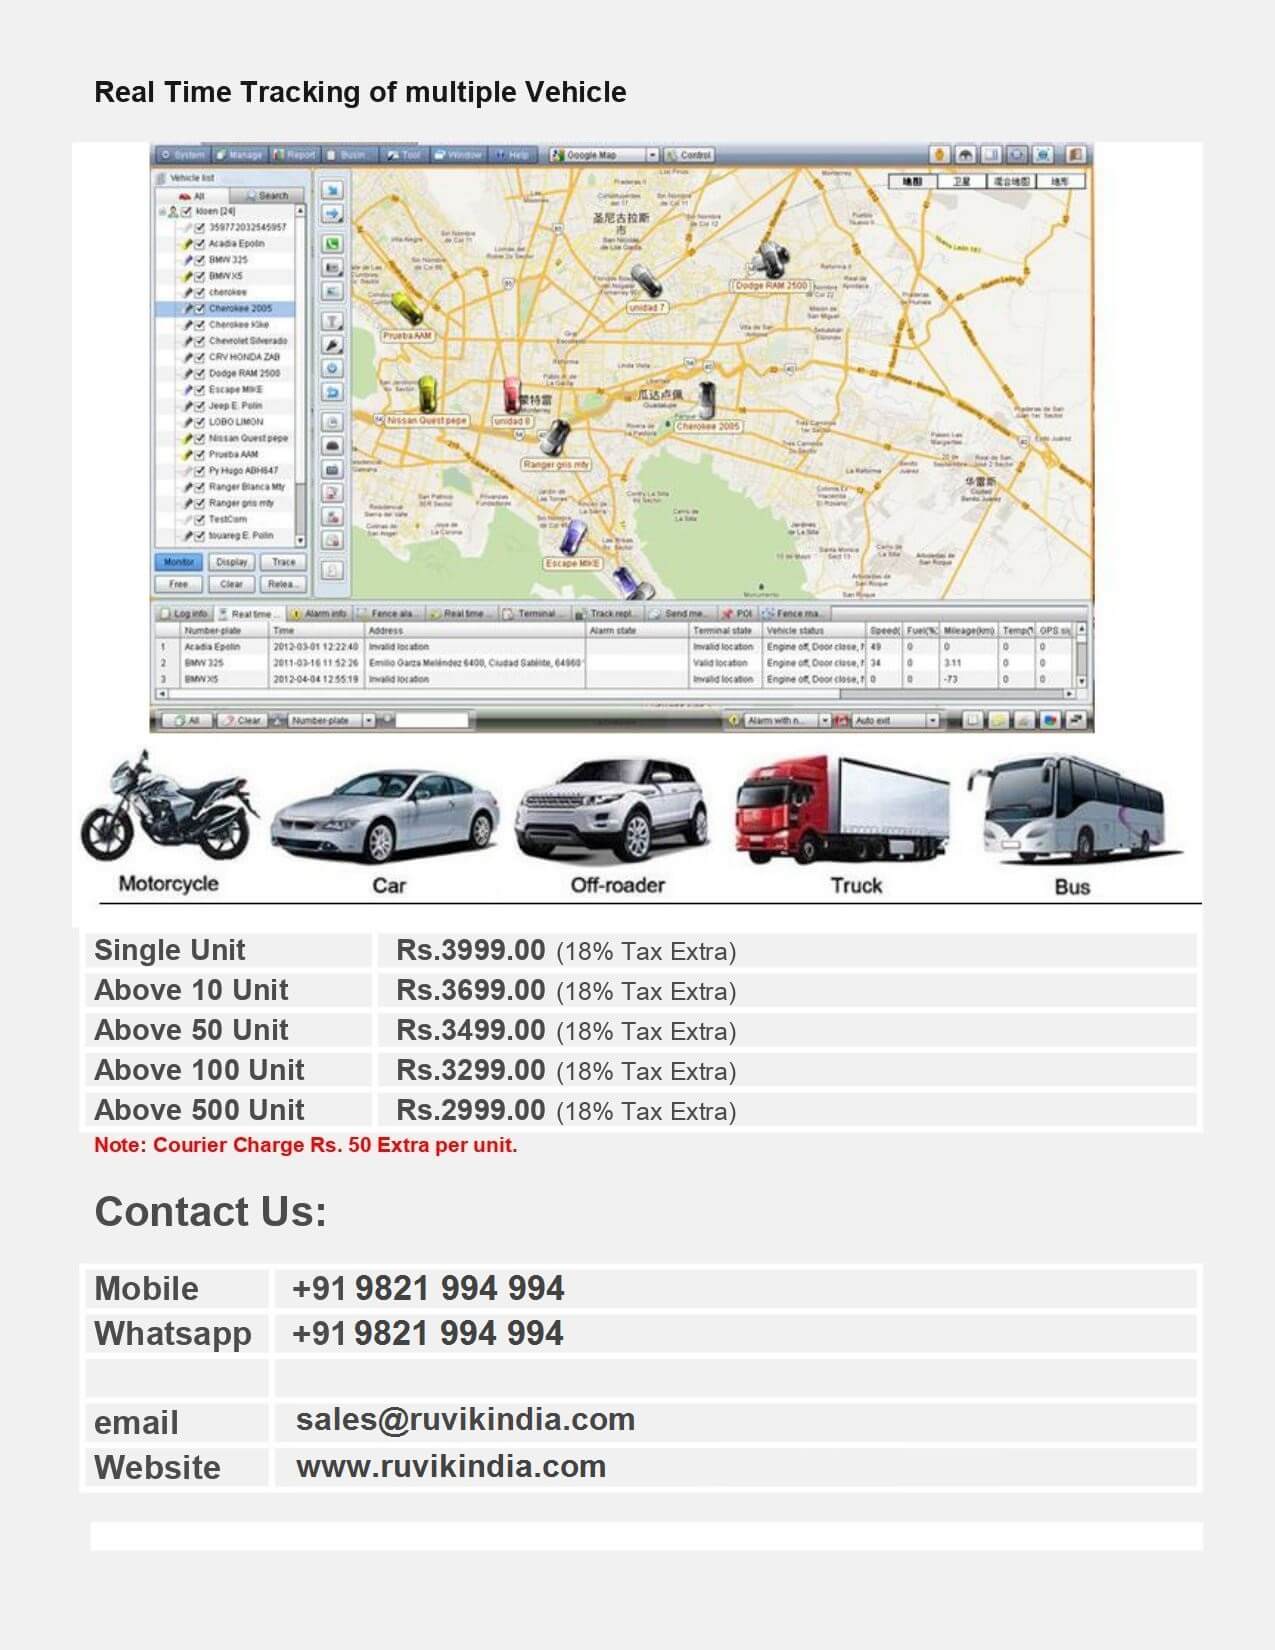 ais 140 gps Vehicle_Tracking_System_4